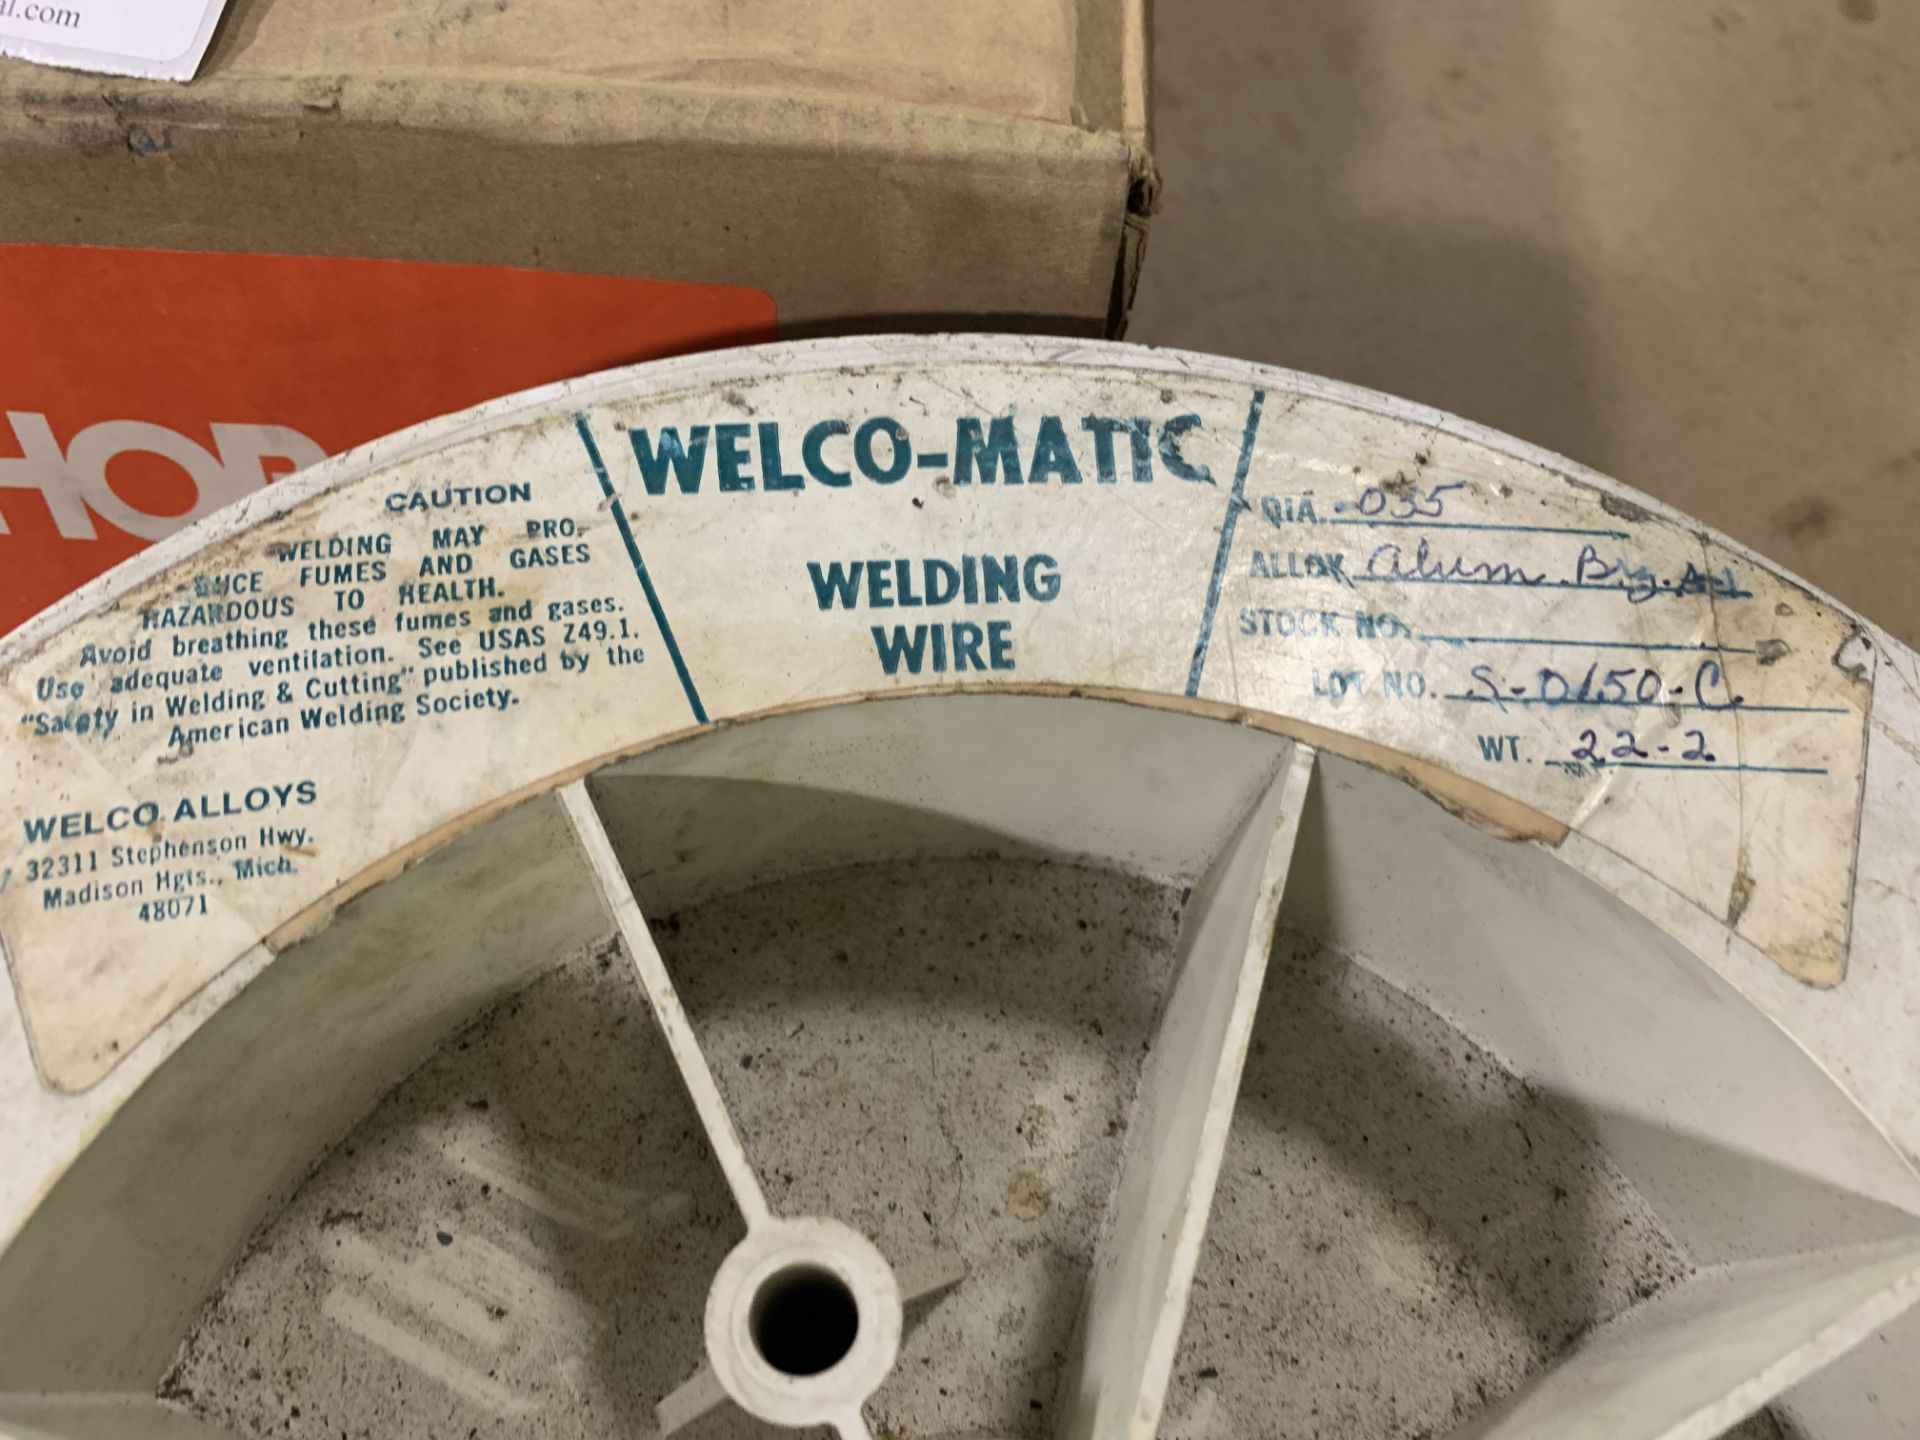 Welco-Matic Welding Wire Aluminum Alloy, .035" Size - Image 2 of 2